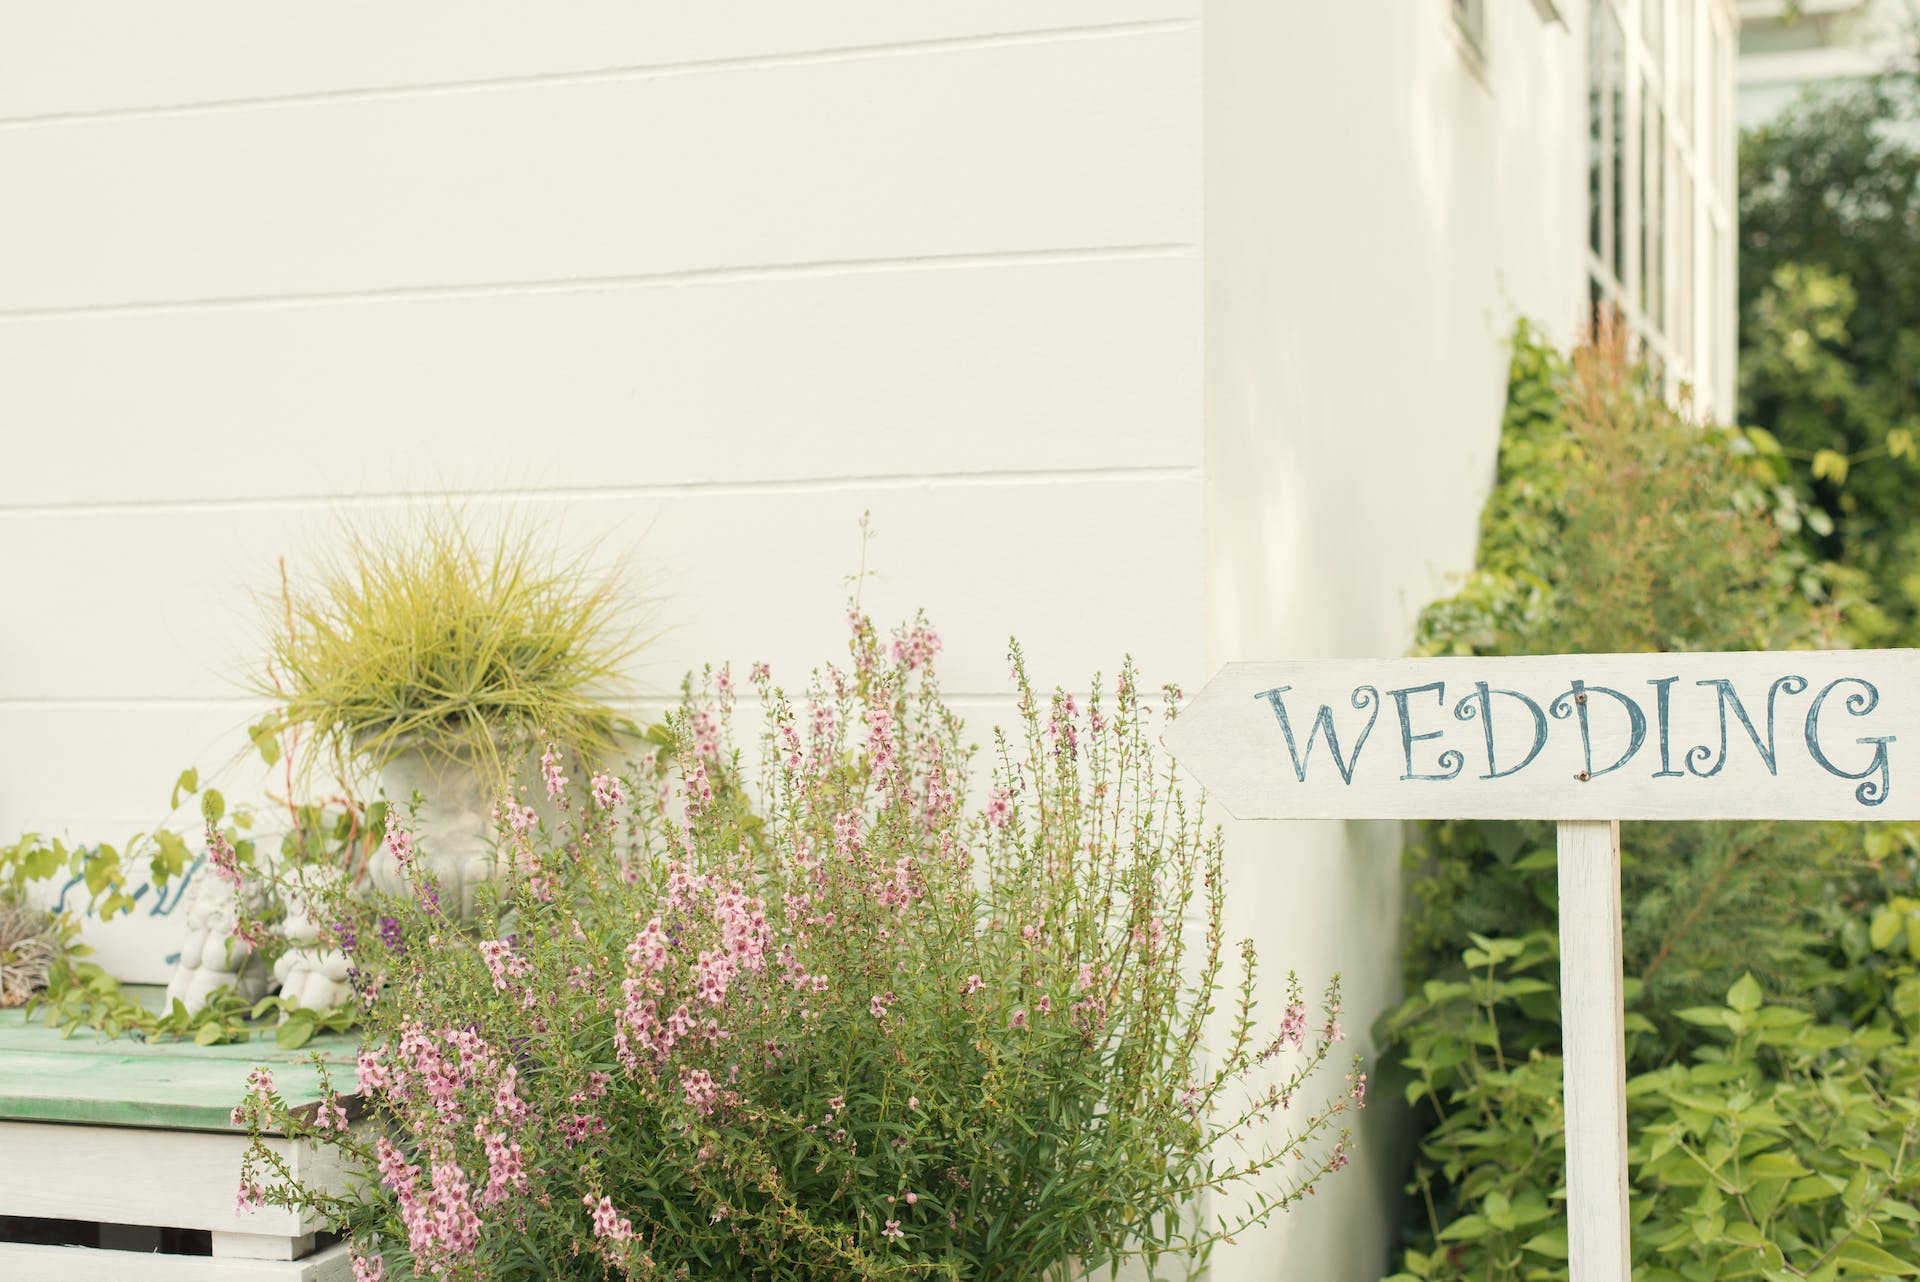 A wedding sign surrounded by plants | Source: Pexels